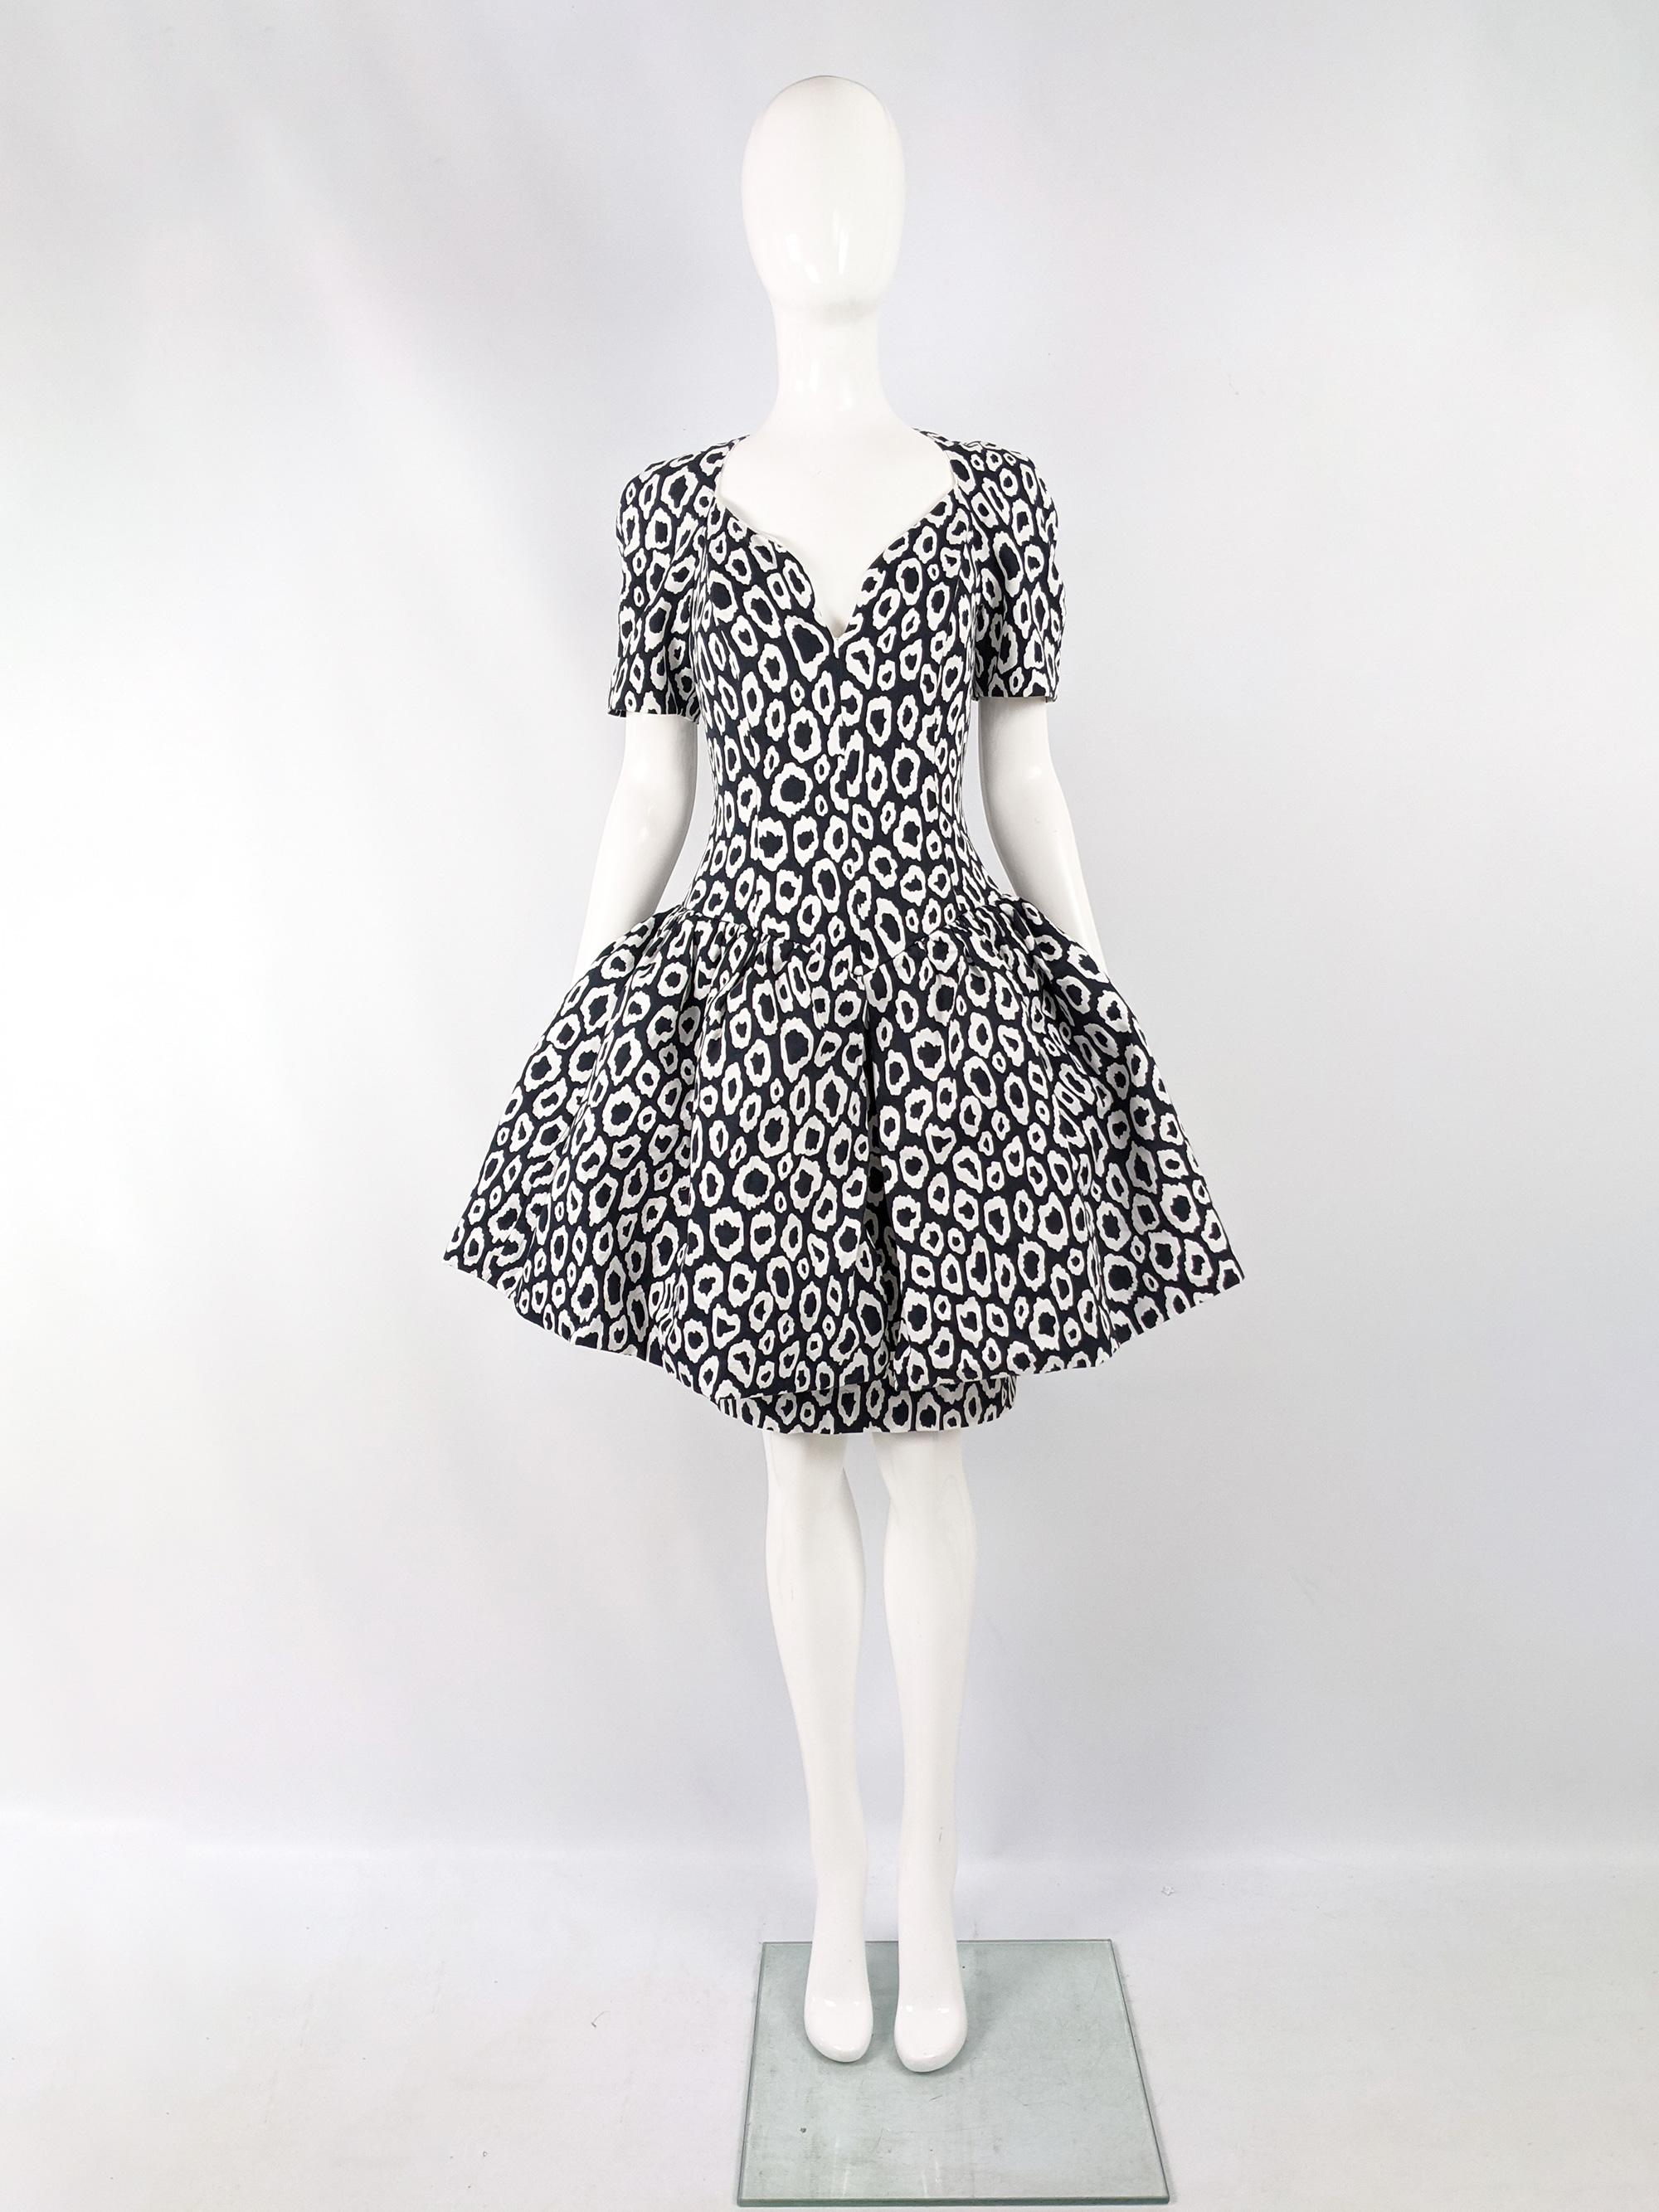 An incredible vintage womens evening / formal party dress from the 80s by luxury French fashion designer, Guy Laroche. In a darkest bluish-grey and white patterned fabric with a layered skirt, the top flared skirt is structured with a horsehair